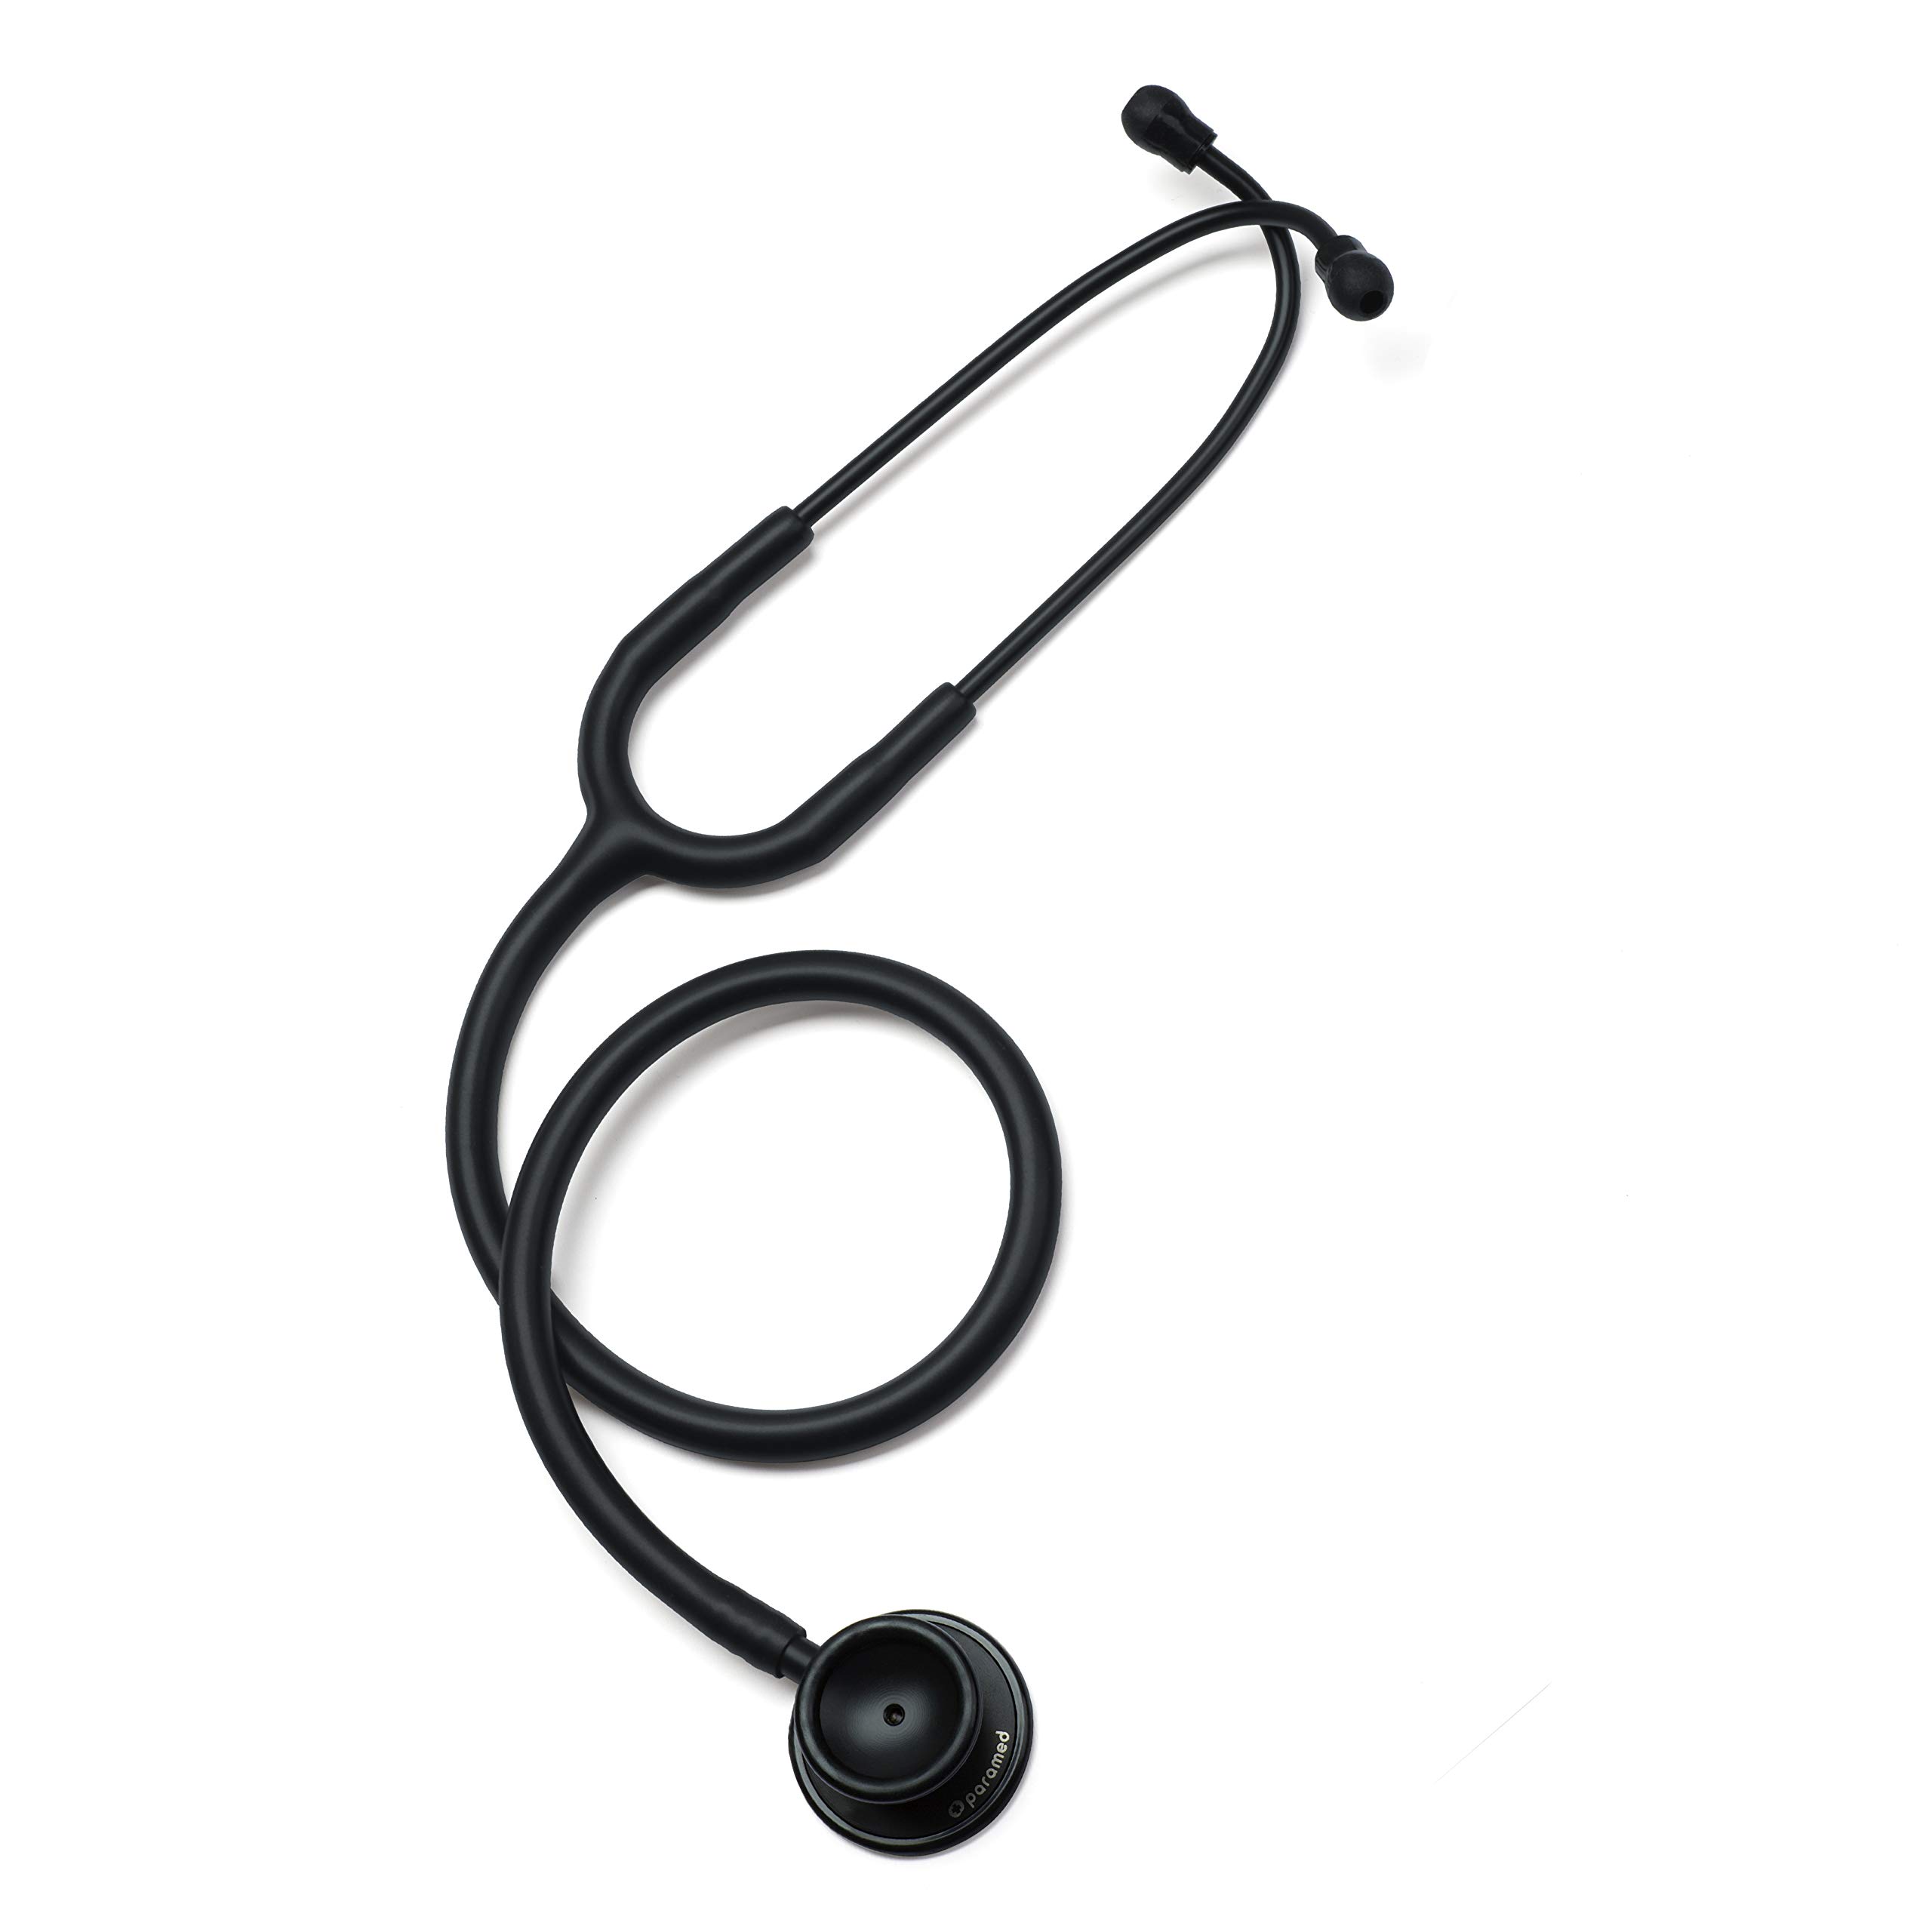 PARAMED Stethoscope - Classic Single Head Cardiology for Medical and  Clinical Use by Paramed - Suitable for Nurse Men Women Pediatric Infant -  22 inch